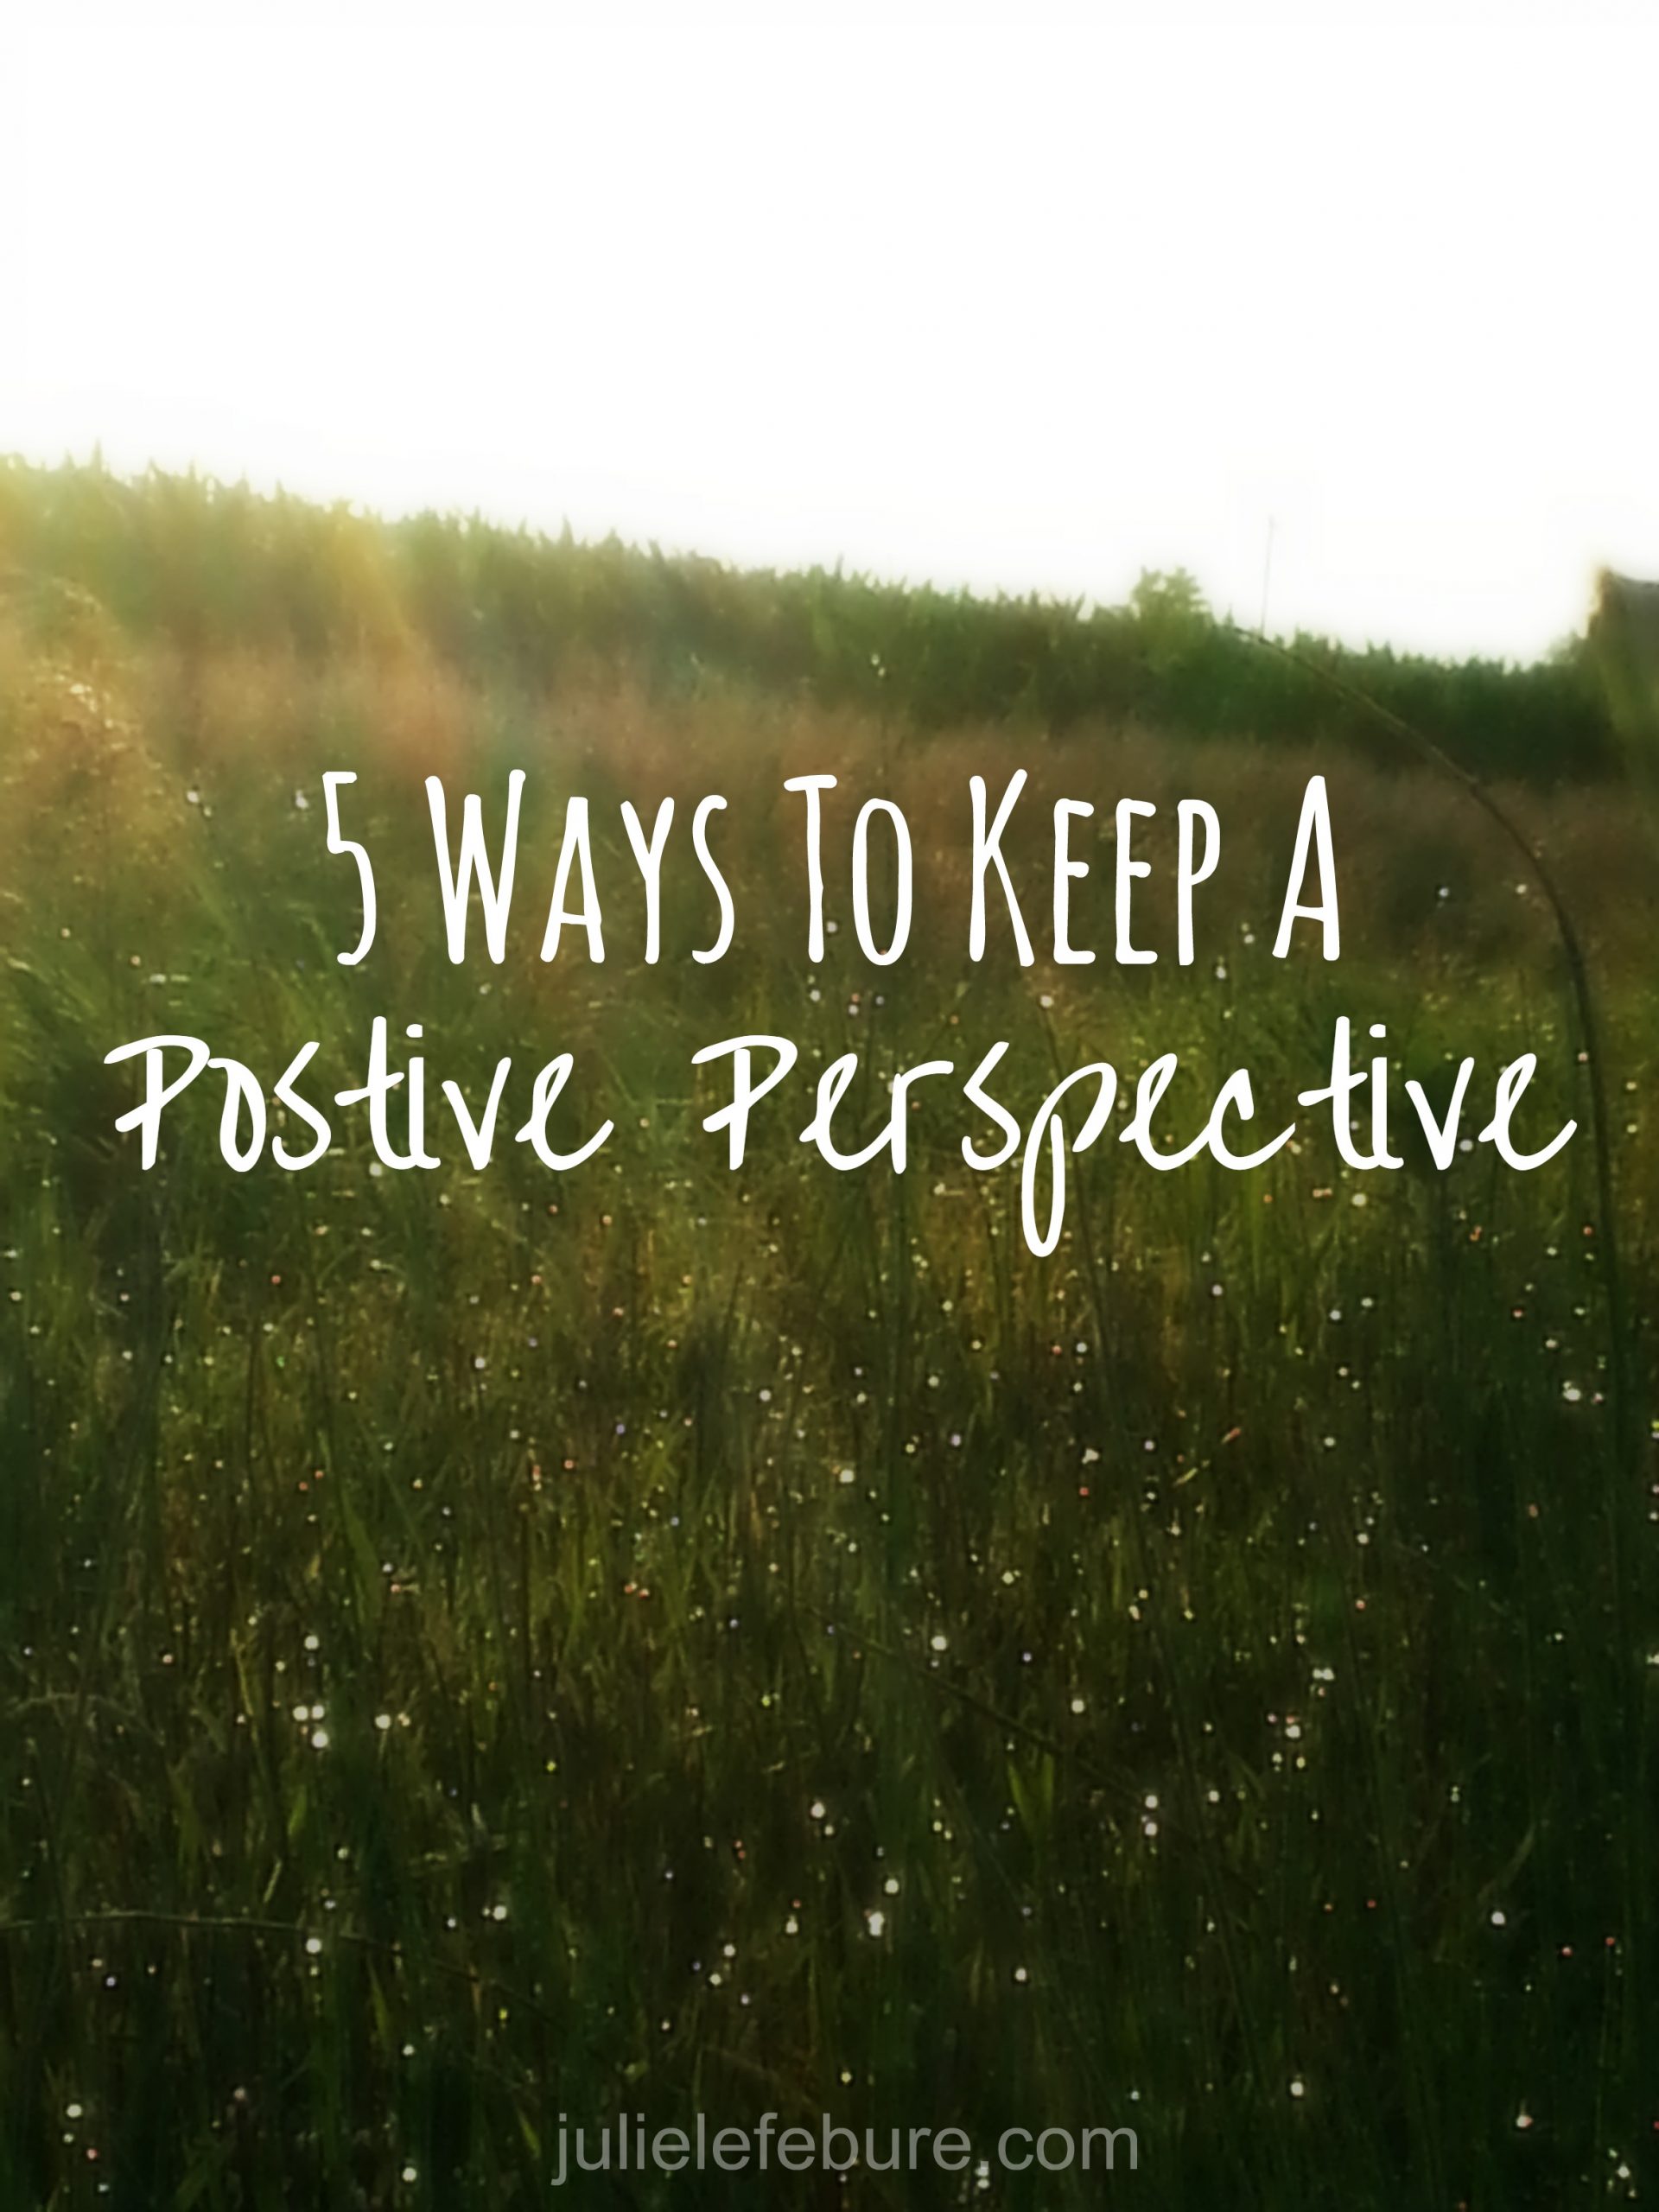 5 Ways To Keep A Positive Perspective